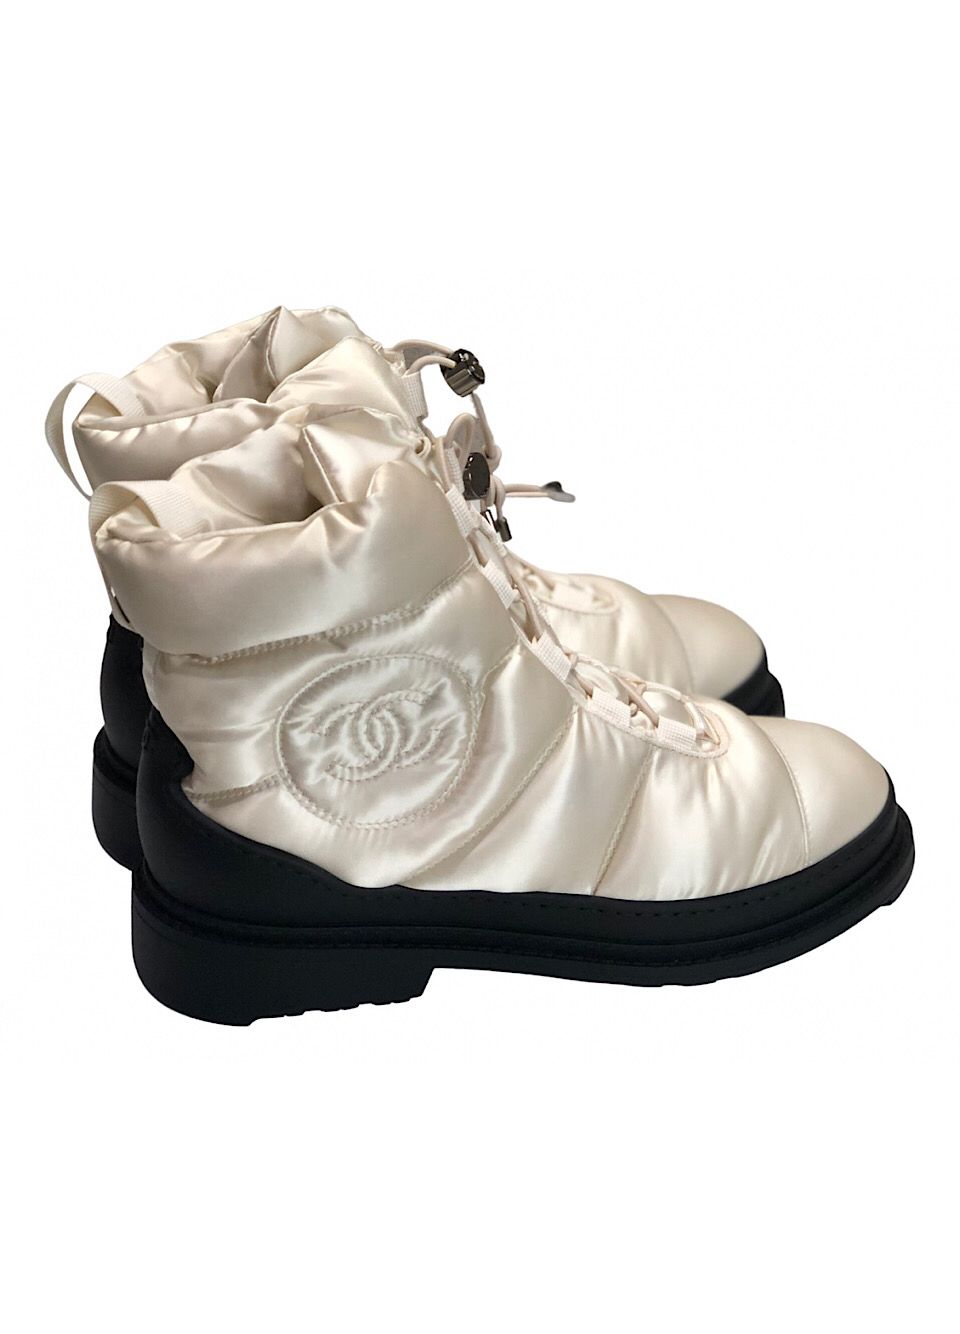 CHANEL, Shoes, Chanel Shearling Boots